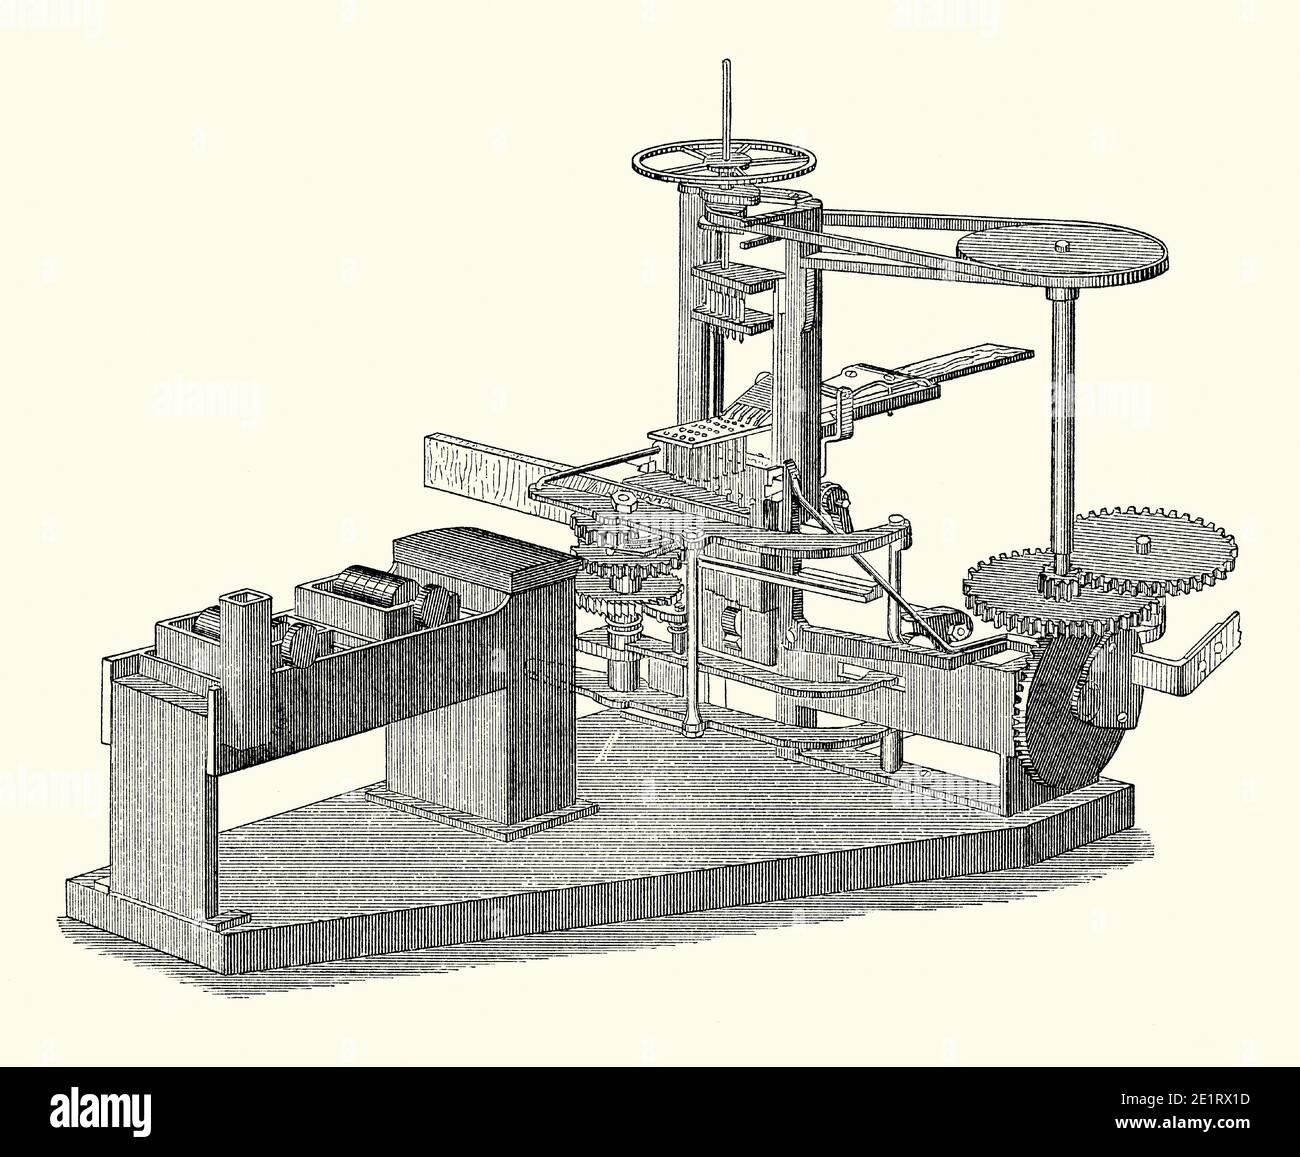 An old engraving of a machine for making wooden matches. It is from a Victorian book of the 1880s. Timber is fed into the machine (centre rear). Cutters reduce this wood to individual matches (centre) ready to be tipped with phosphorus. Early matches used white phosphorus, but being easy to ignite, they caused accidental fires and white phosphorus was highly toxic. Using nontoxic red phosphorus, Swede J E Lundstrom introduced safety matches in 1855. Early match making was done manually. Mechanisation slowly took over in the 1800s – the first automatic match machine was patented in 1888. Stock Photo